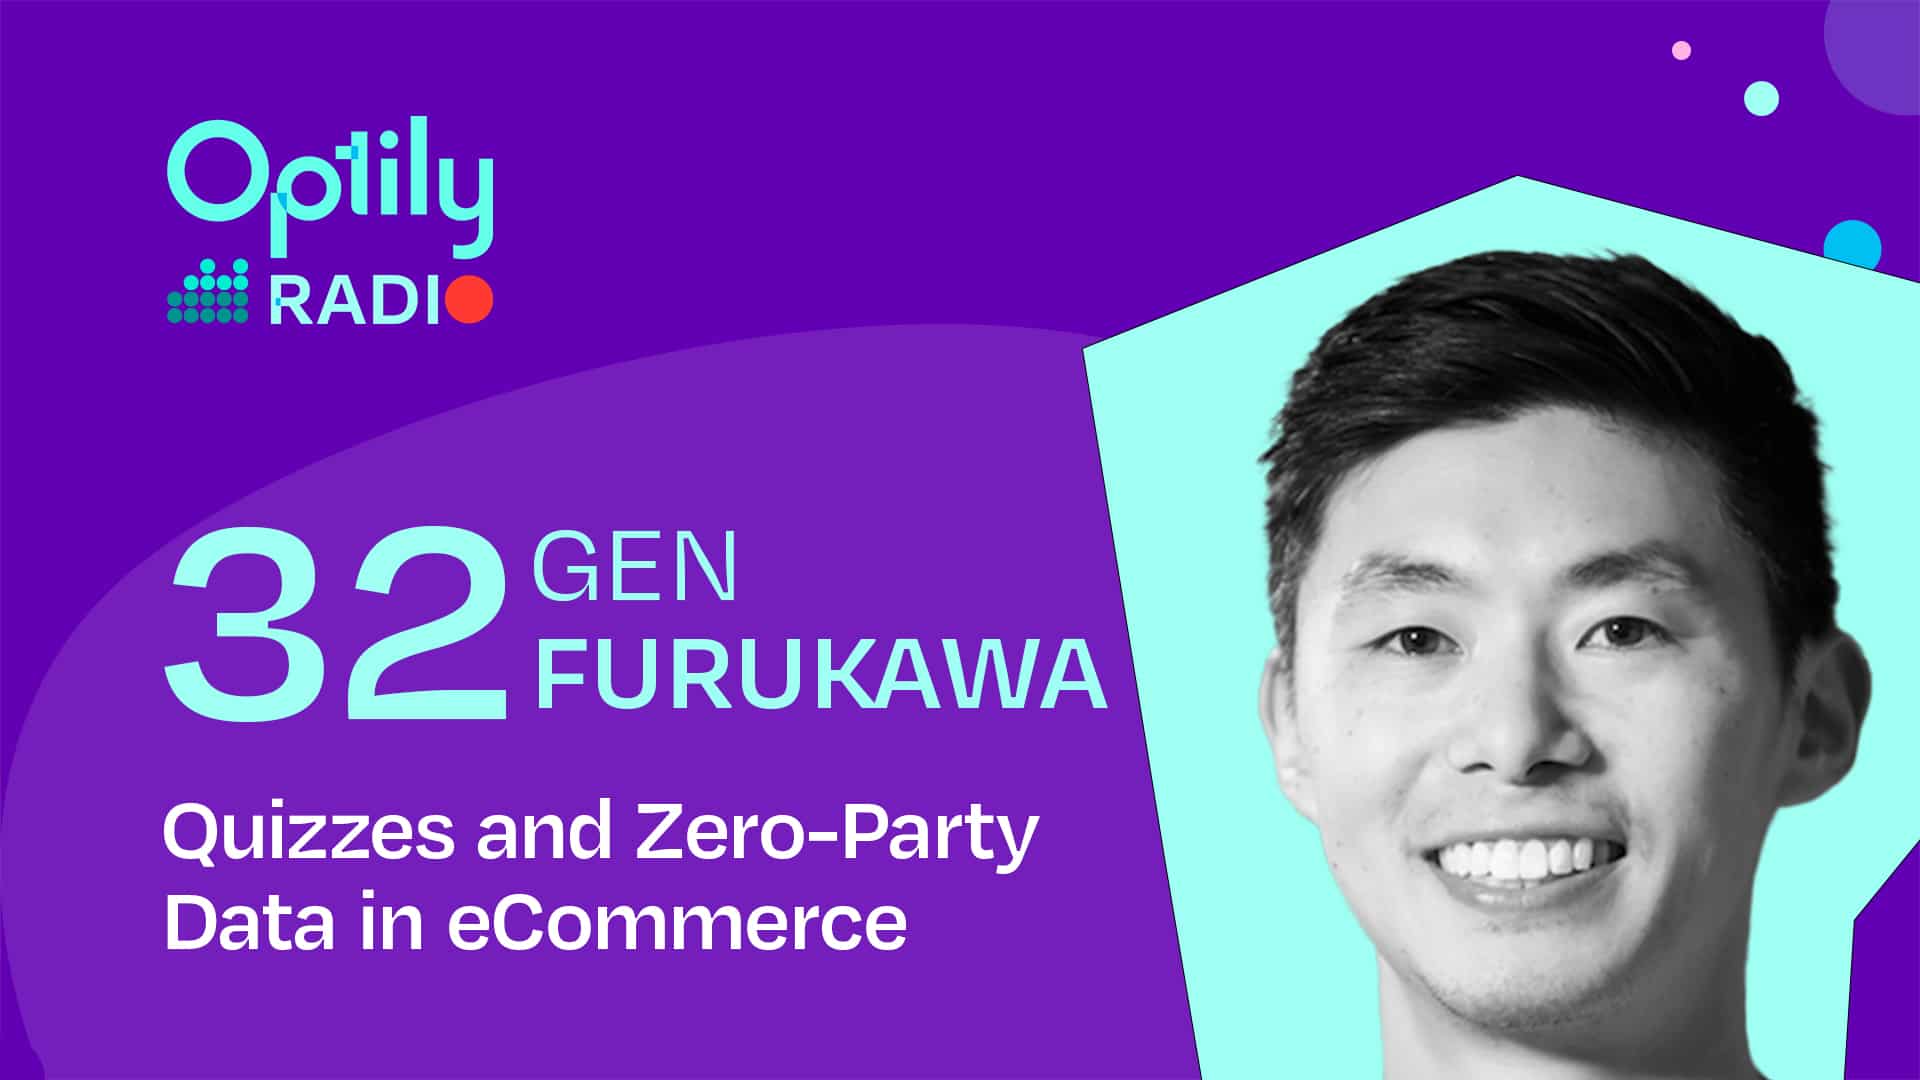 Quizzes and Zero-Party Data in eCommerce: Personalize marketing with ease with Gen Kurukawa